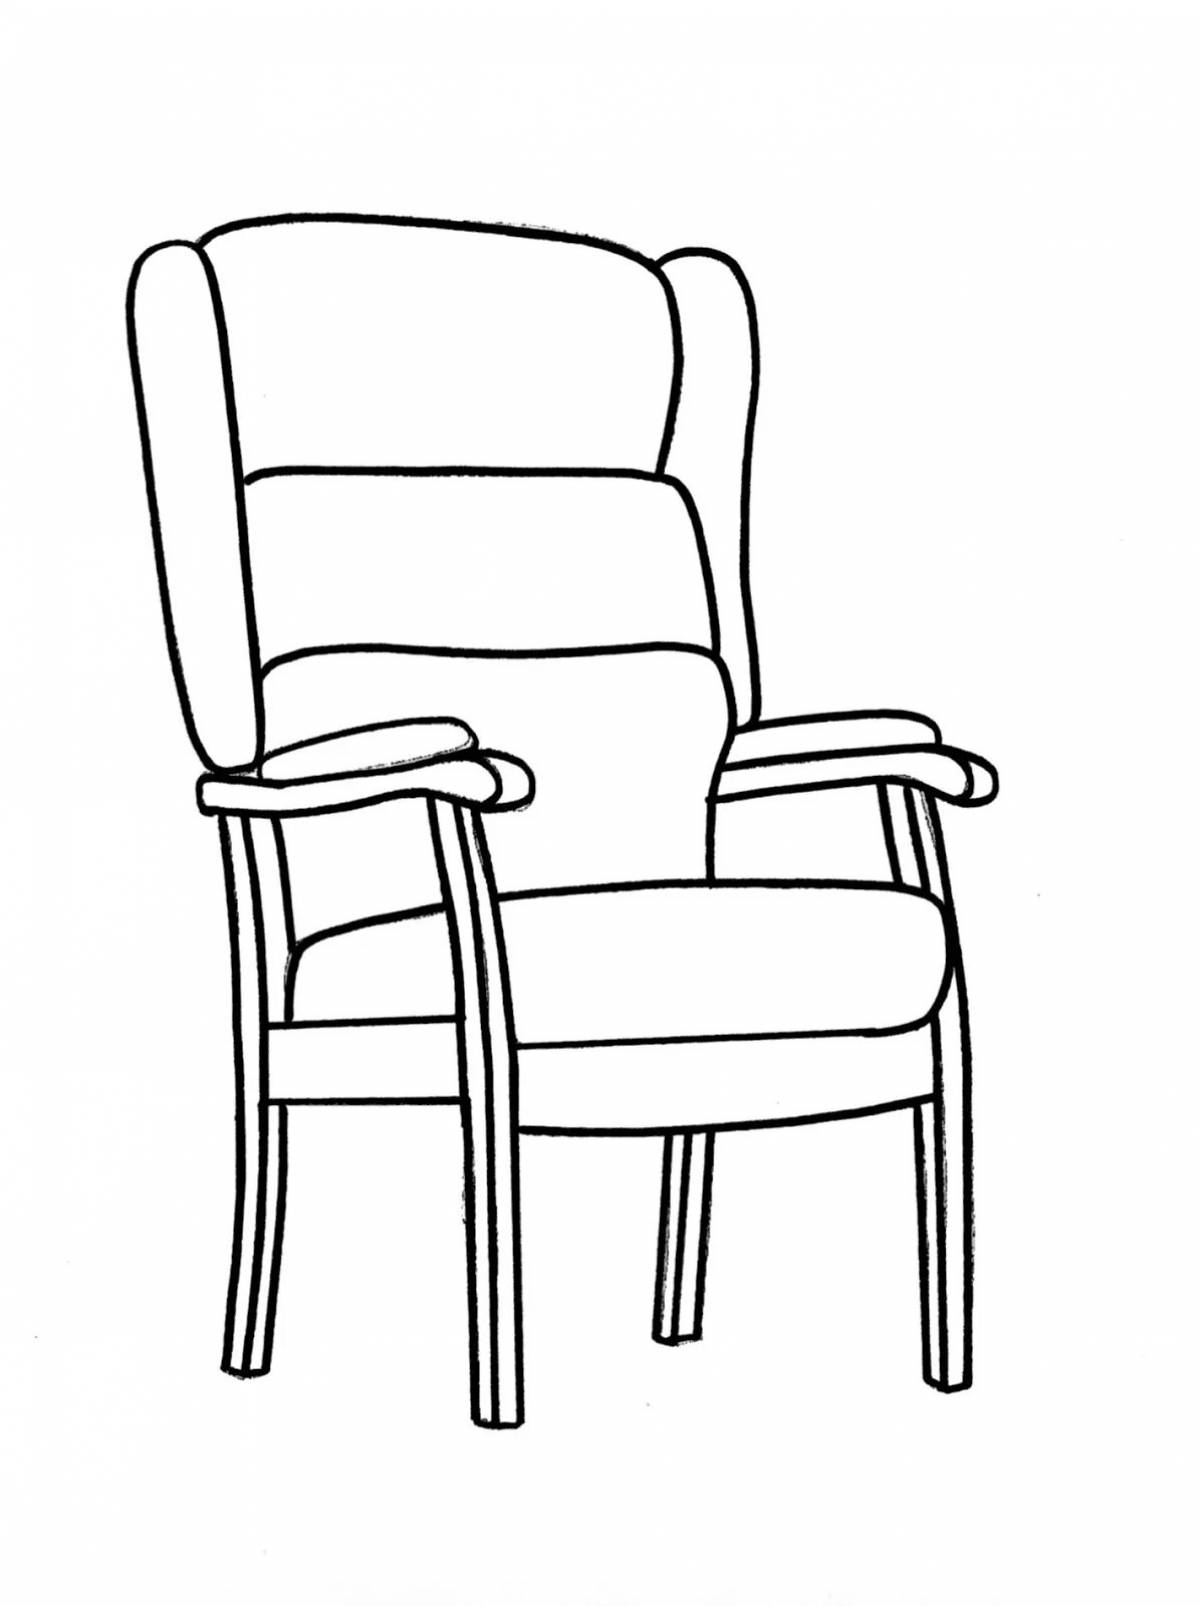 Coloring book funny chair for kids